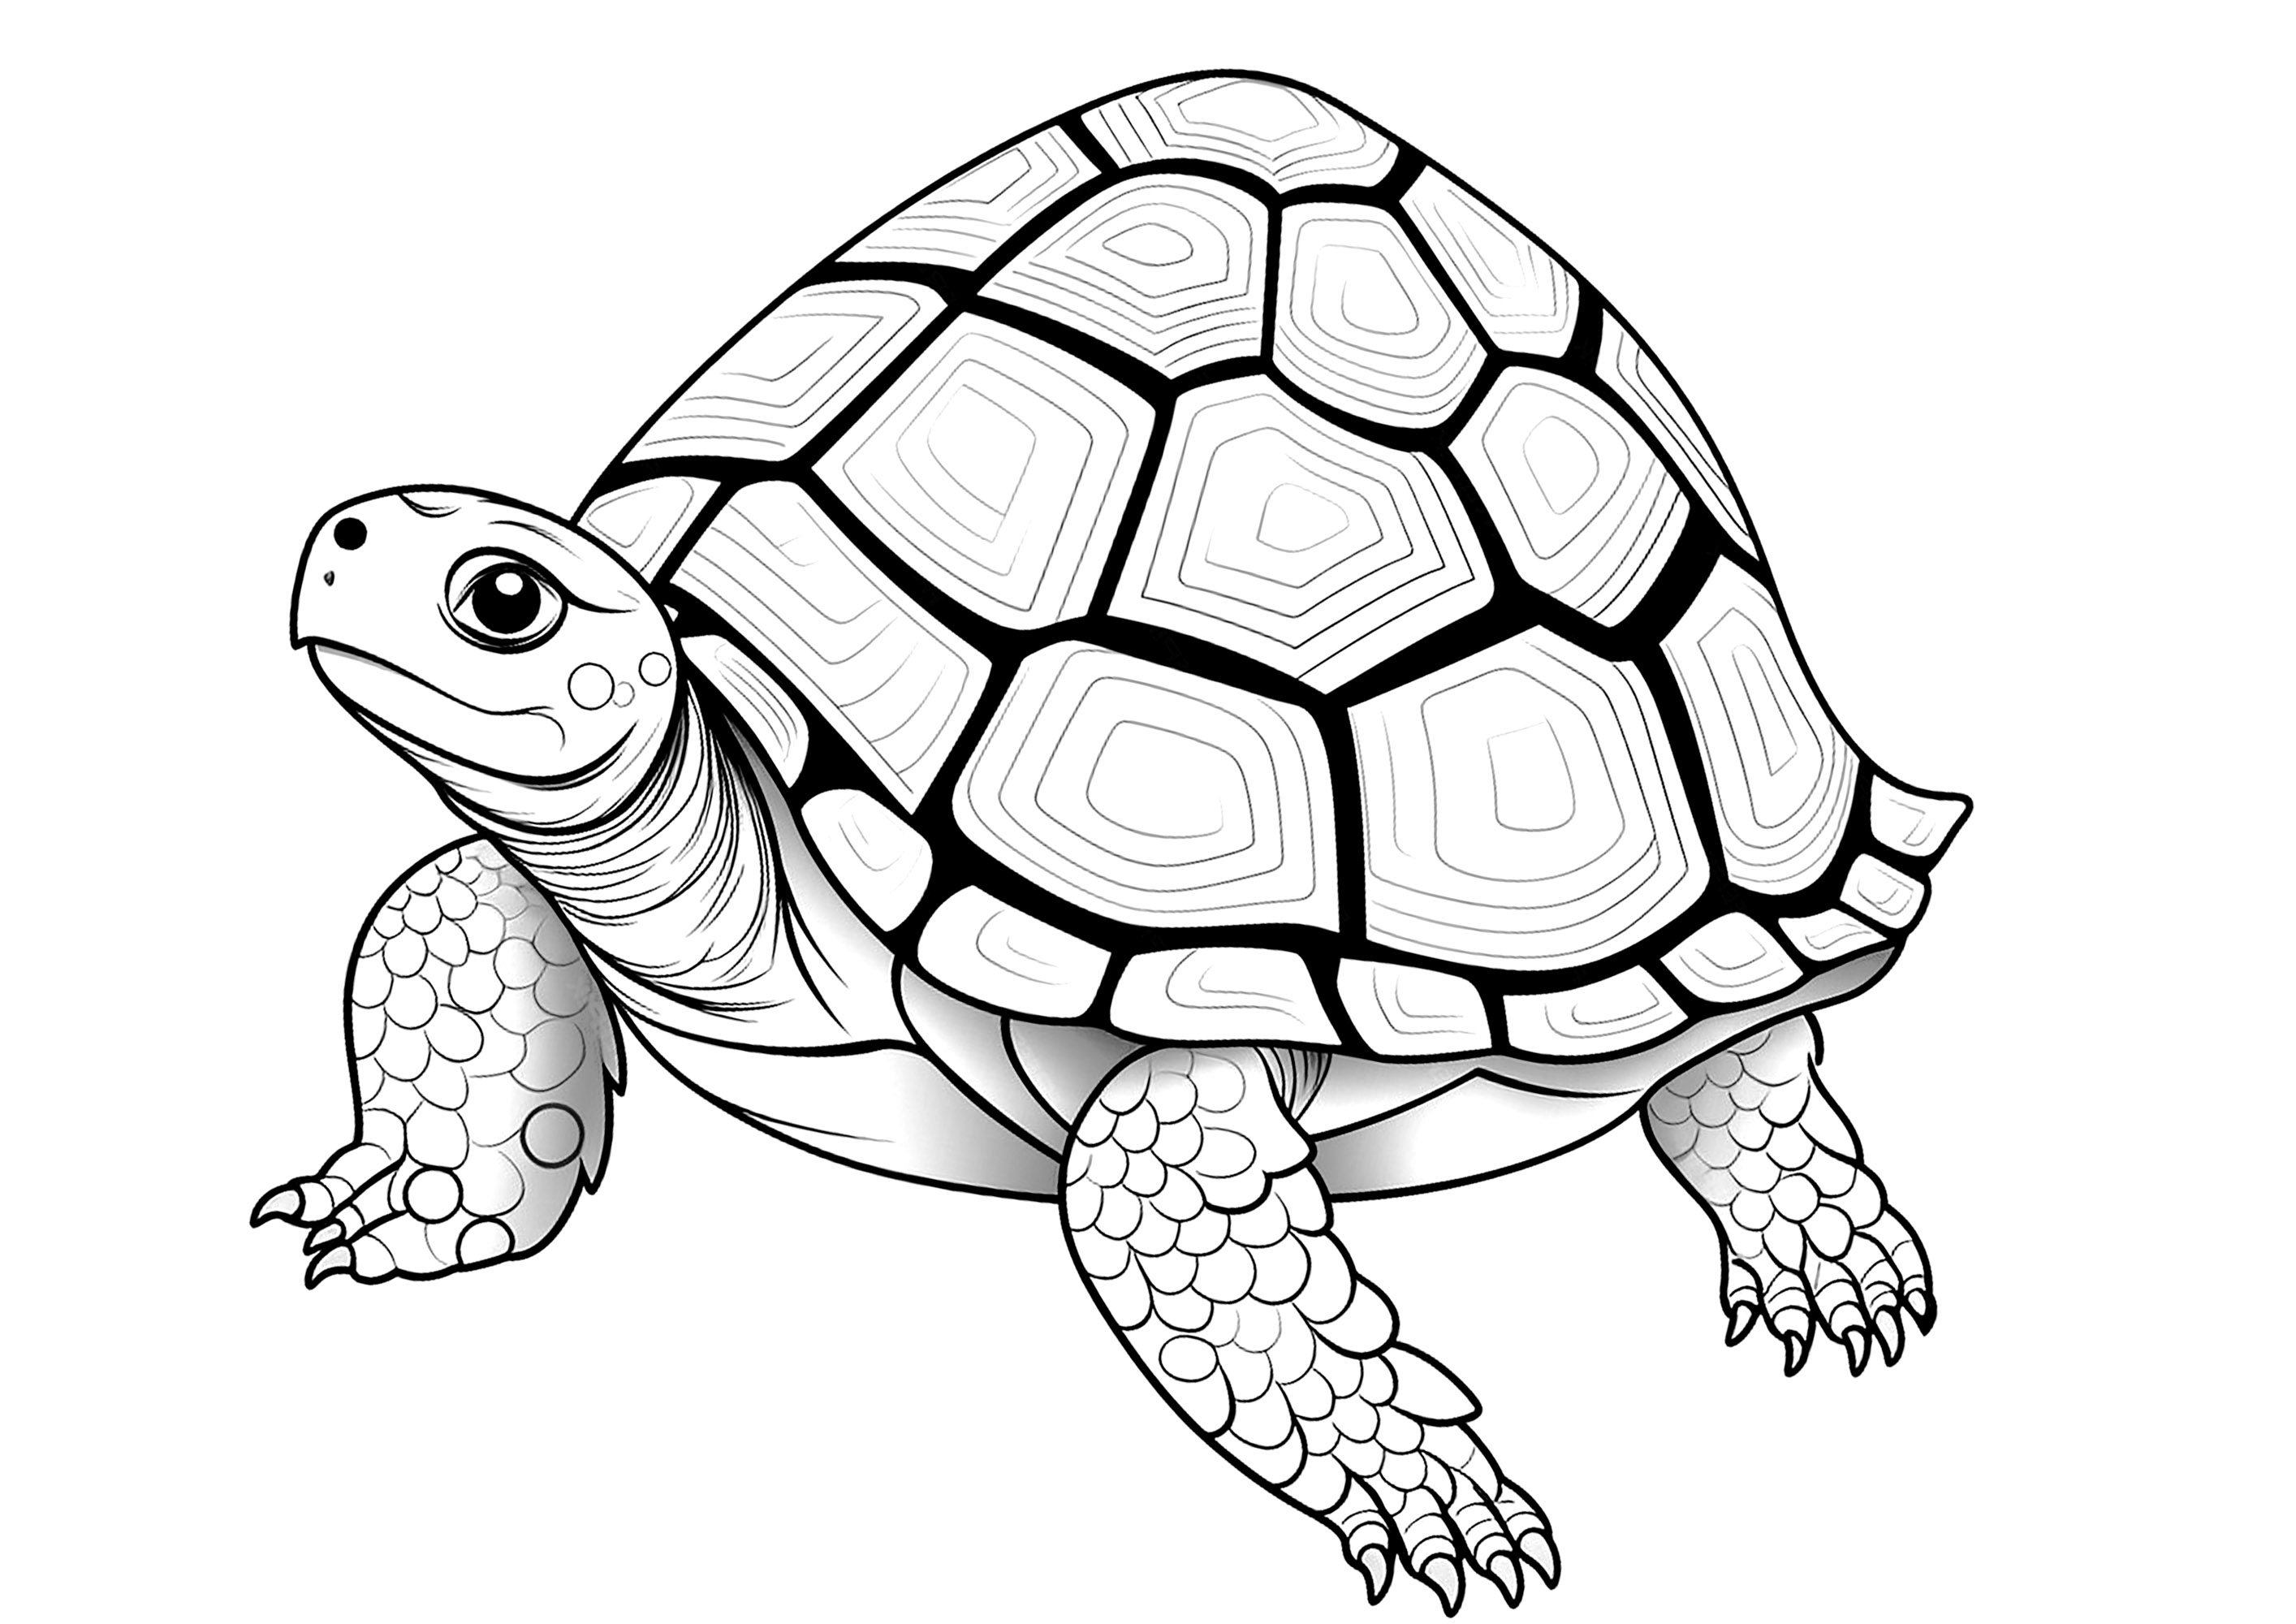 Tortoise Colouring Page (teacher made) - Twinkl